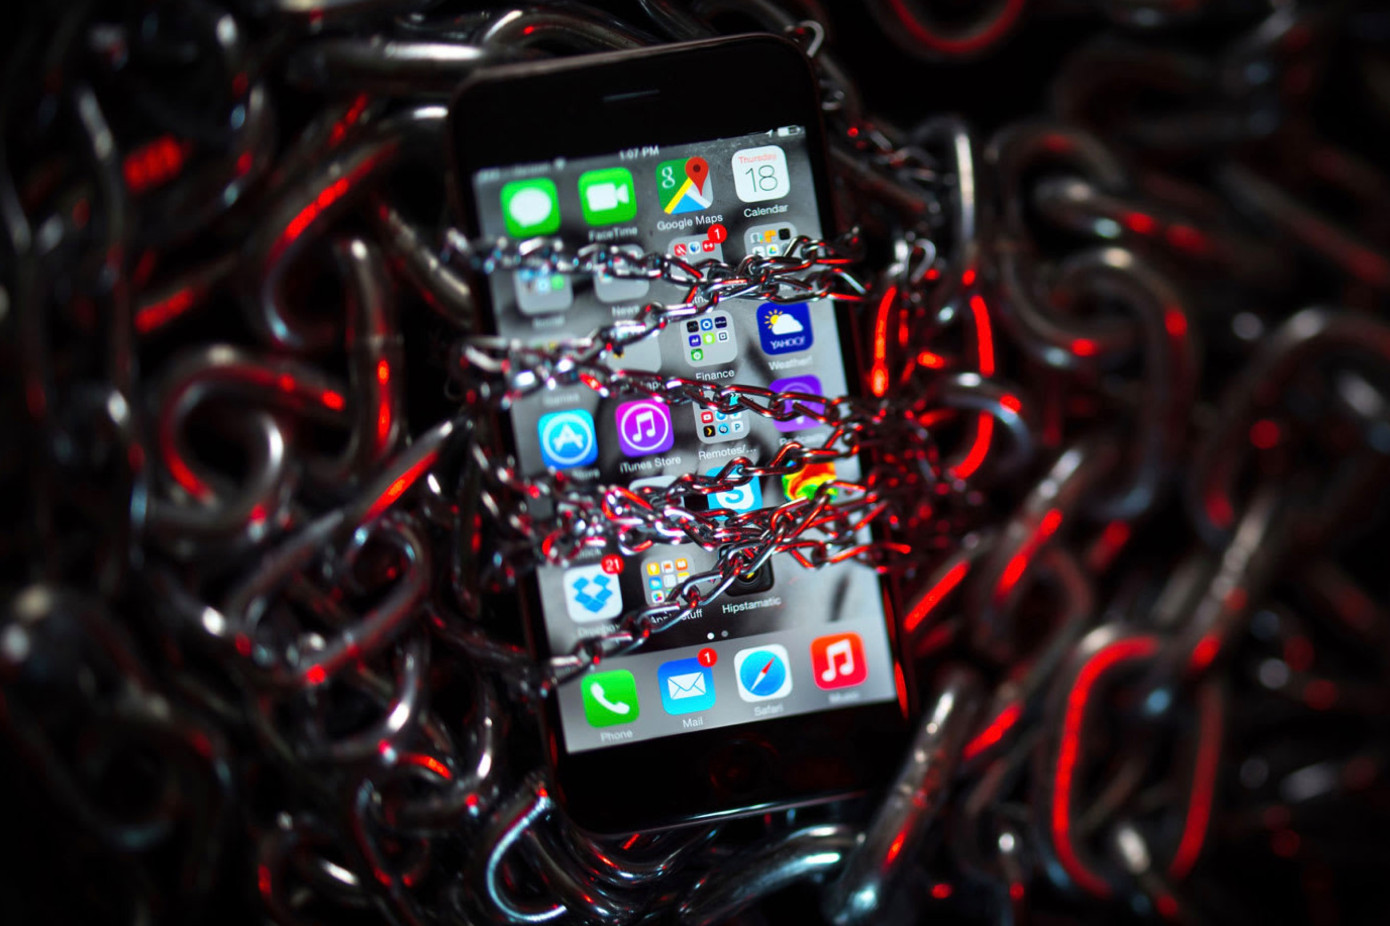 Malicious websites were used to secretly hack into iPhones for years, says Google